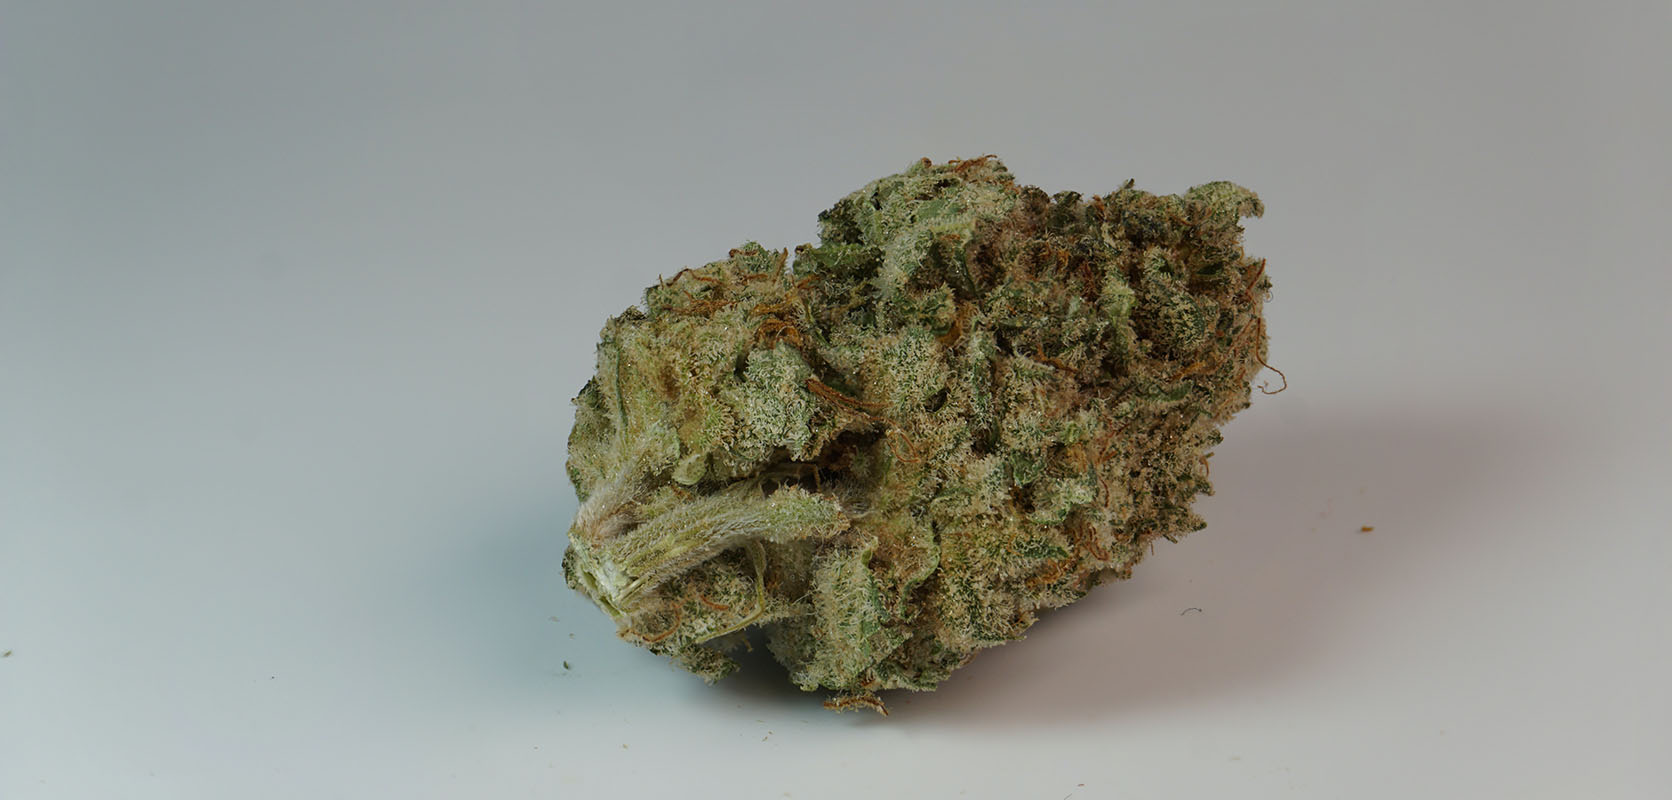 Rainbow Driver strain budget bud from Low Price Bud online dispensary for cheap canna, dispensary weed, dab pen, and edibles online Canada.